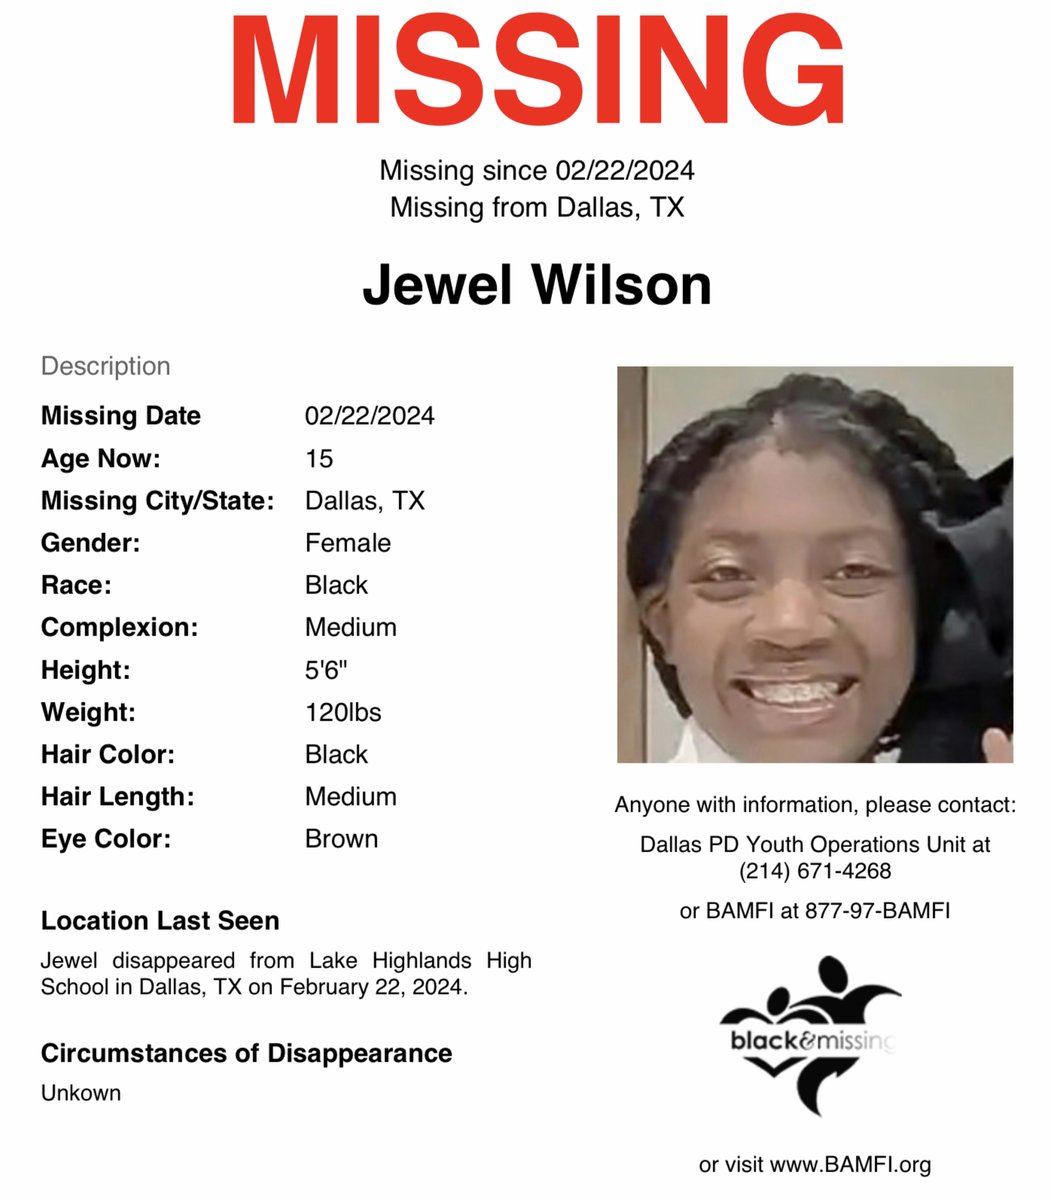 #Dallas, #Texas: 15y/o Jewel Wilson disappeared from Lake Highlands High School February 22. Have you seen Jewel? #HelpUsFindJewel #JewelWilson #LakeHighlandsHighSchool